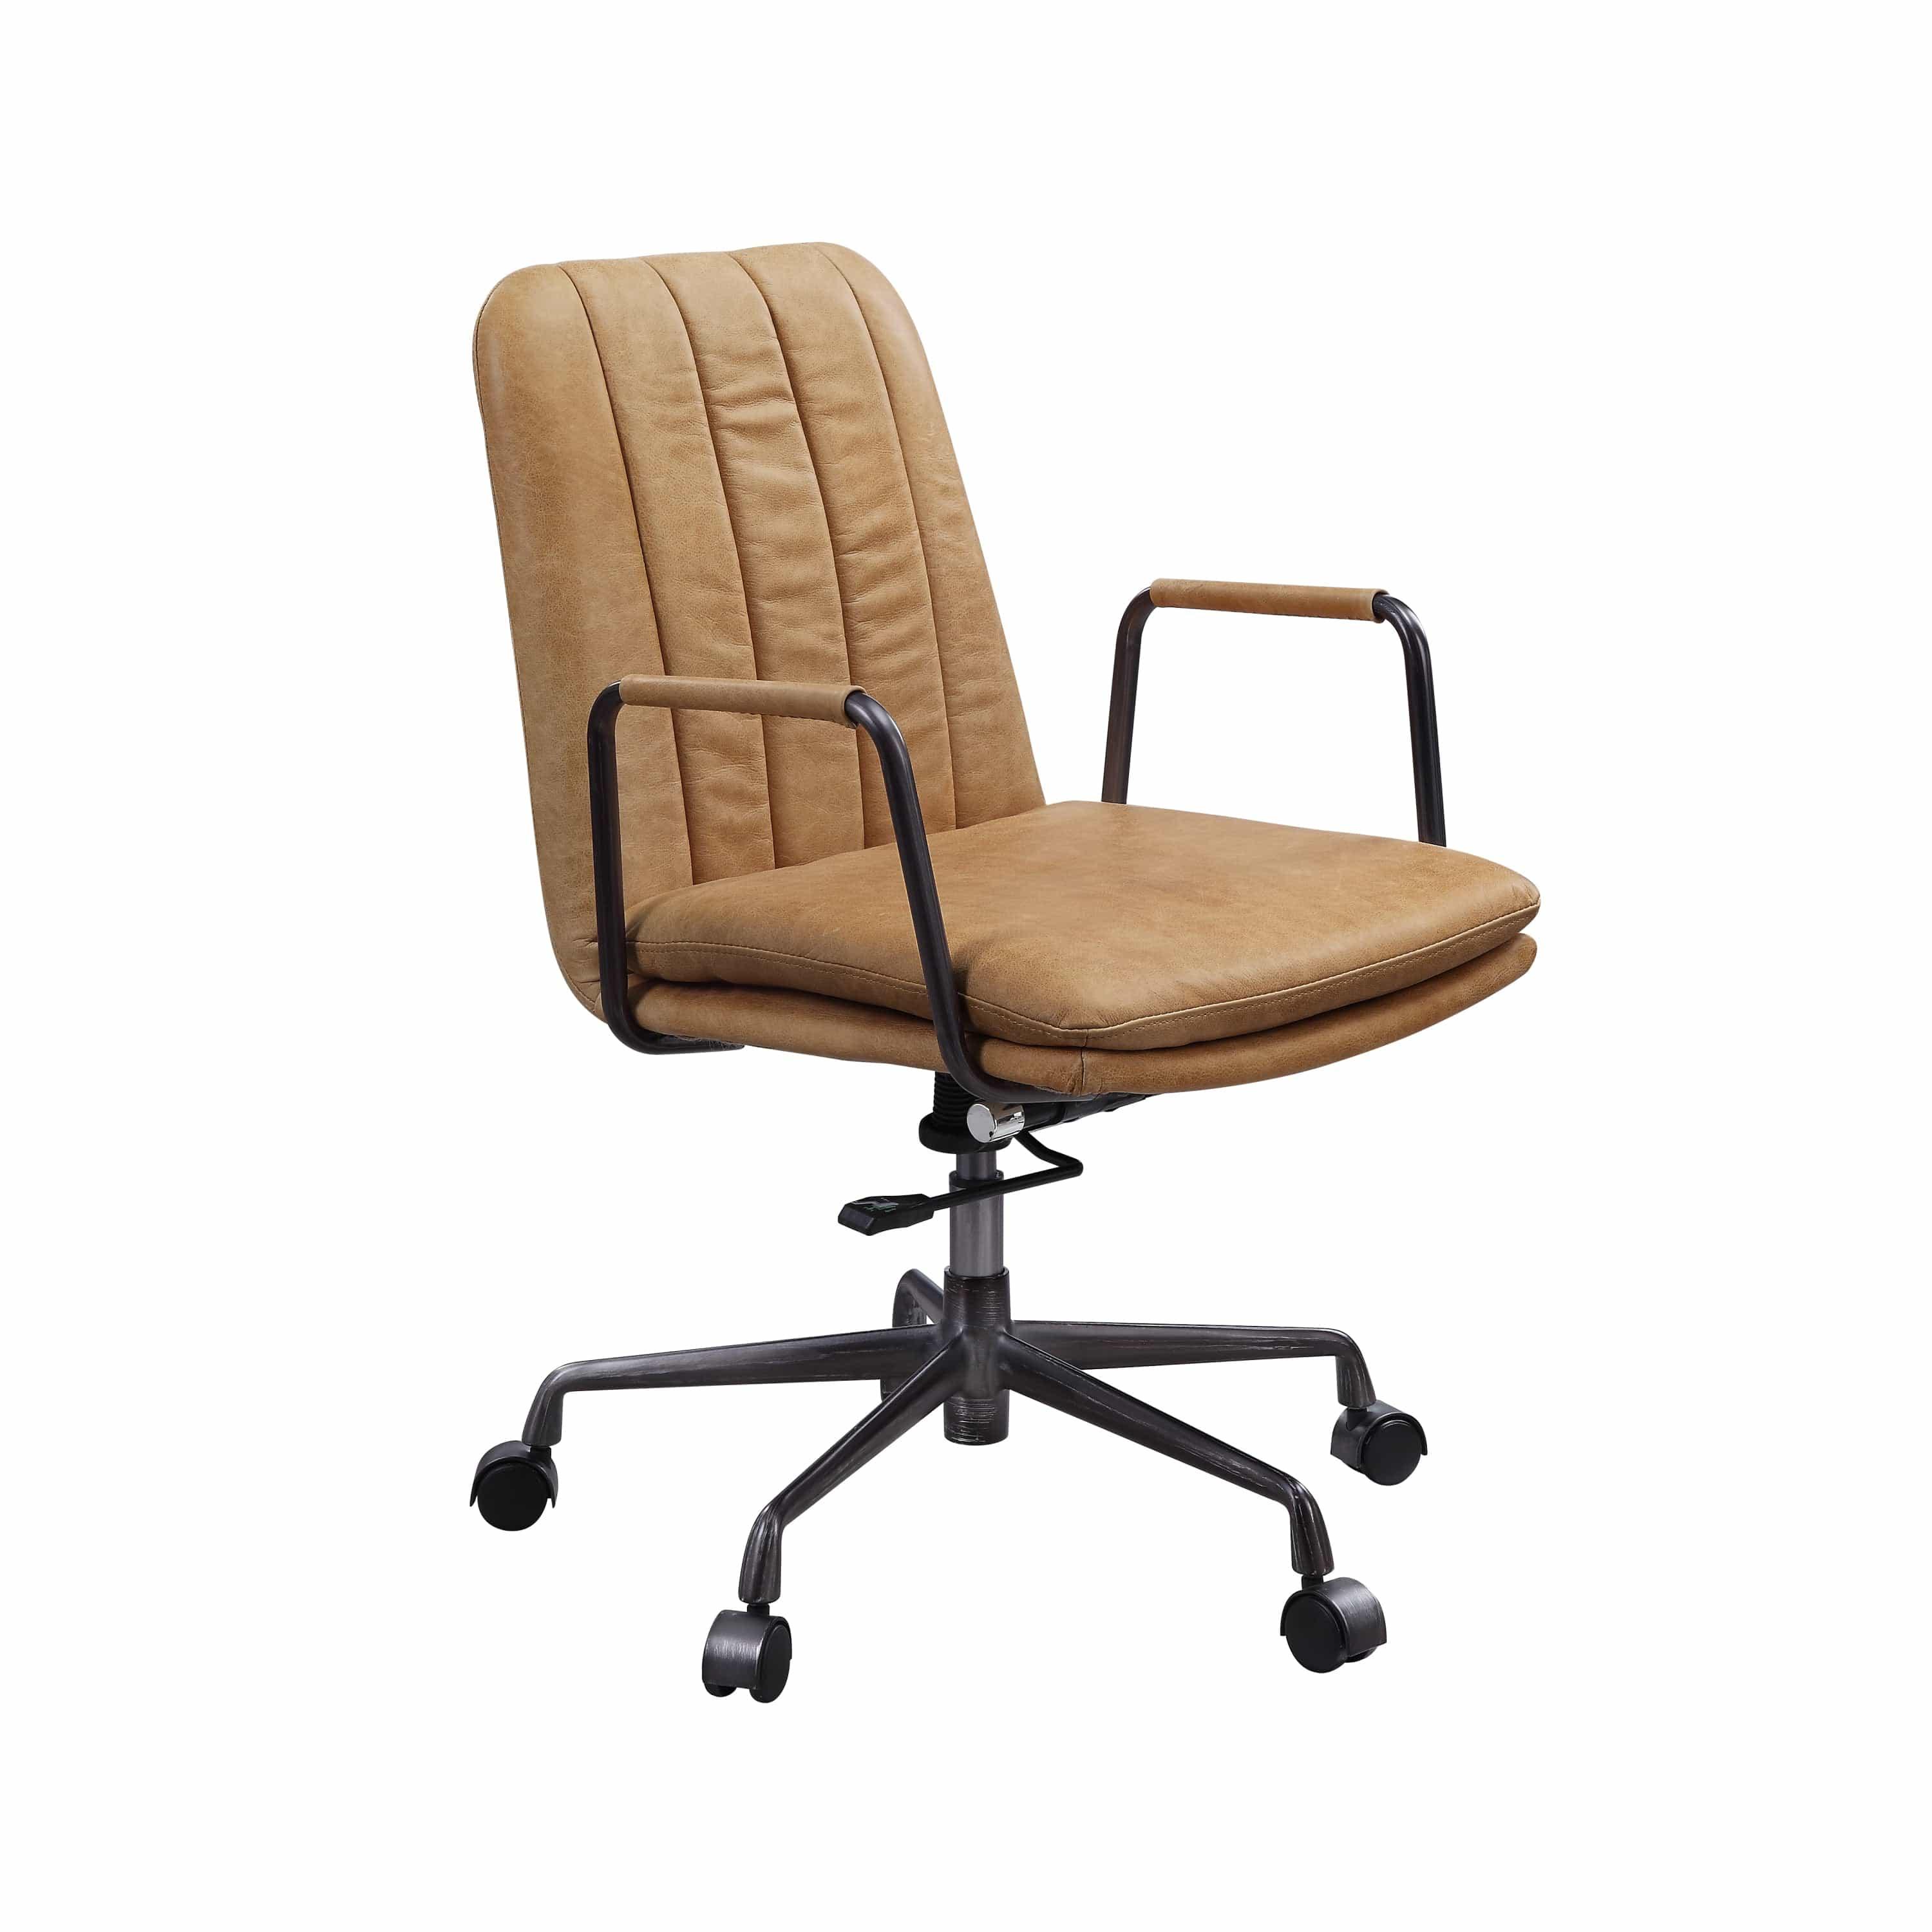 Shop ACME Eclarn Office Chair in Rum Top Grain Leather 93174 Mademoiselle Home Decor